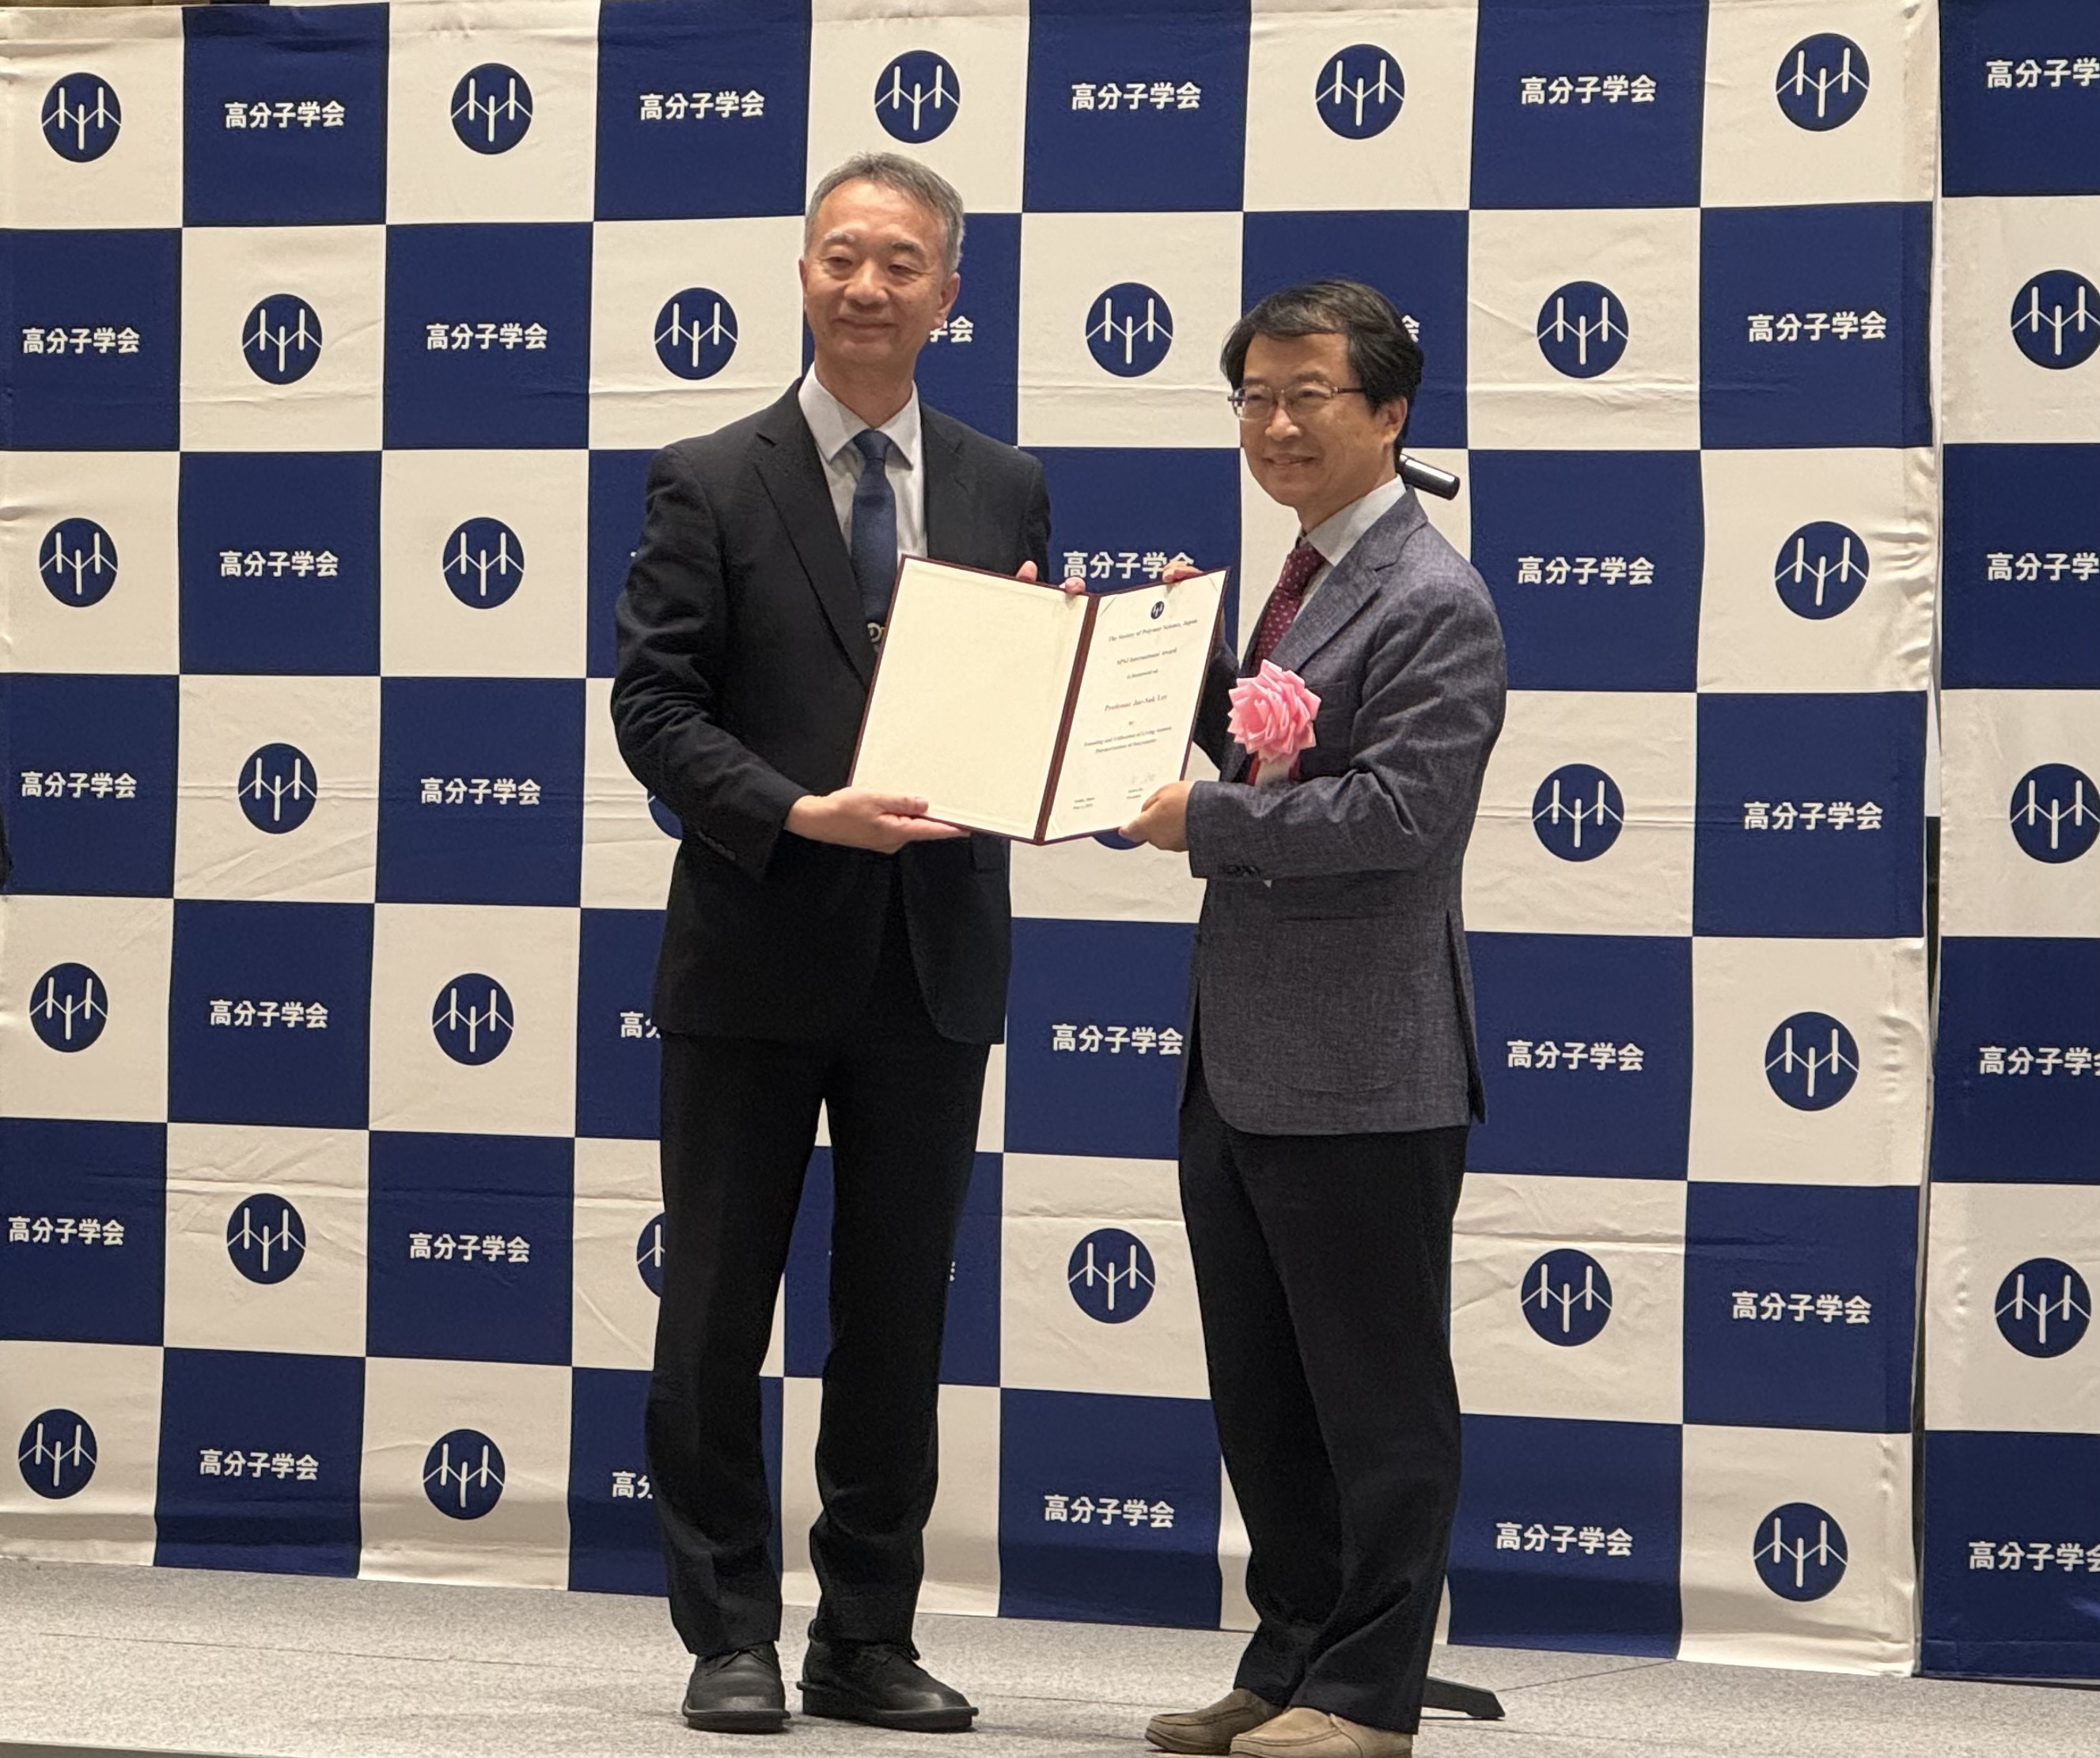 GIST School of Materials Science and Engineering Professor Emeritus Jae-Suk Lee receives the International Award from the Polymer Society of Japan 이미지